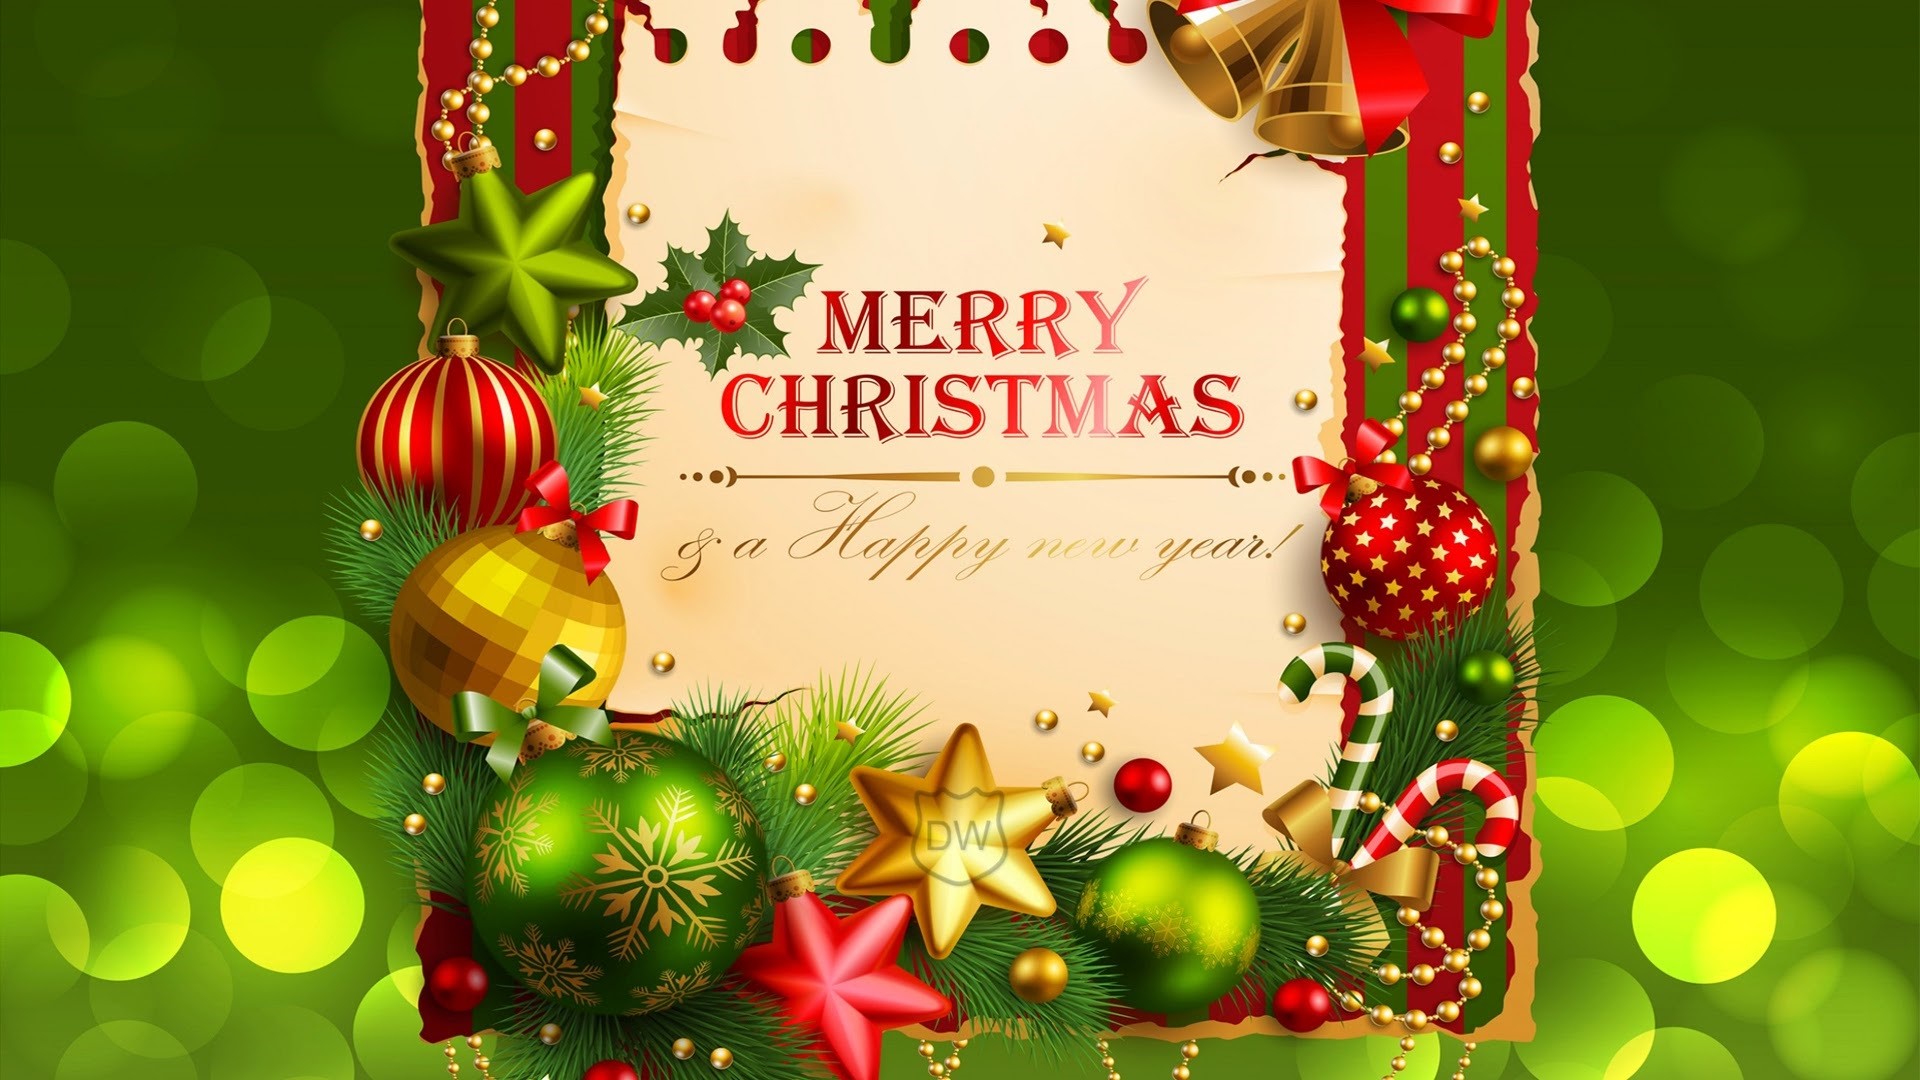 Merry christmas wallpaper Beautiful15 collection merry christmas and